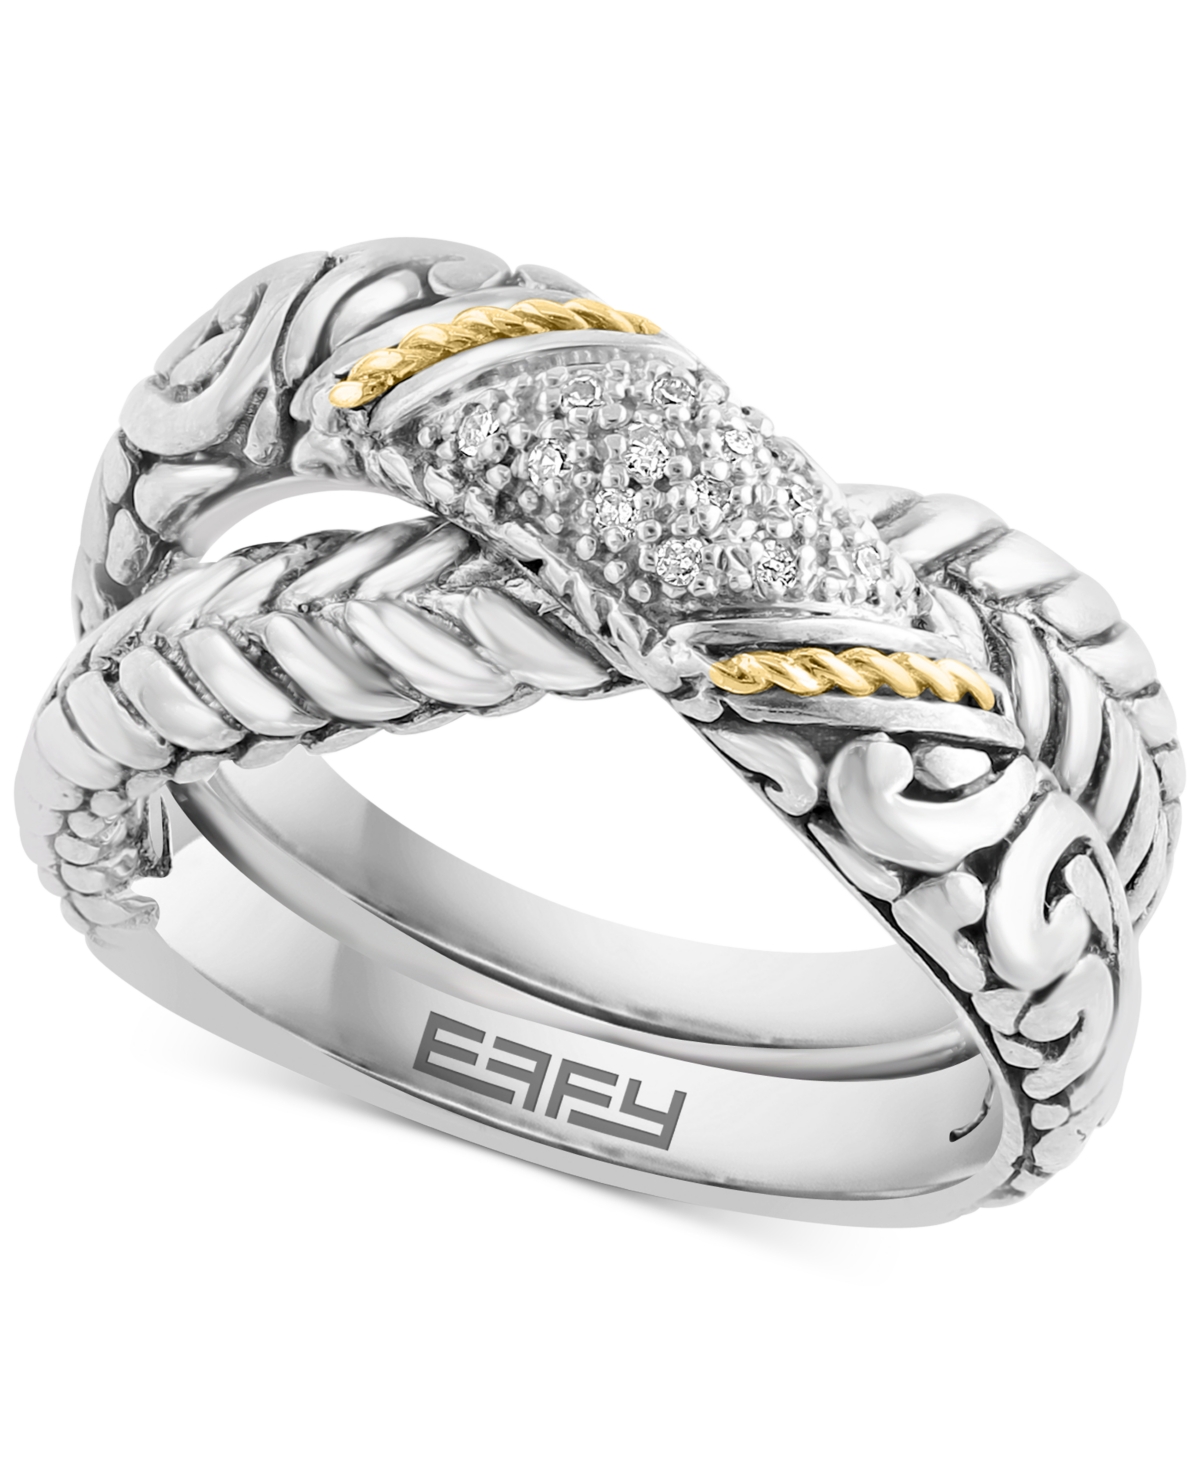 Effy Collection Effy Diamond (1/20 Ct. T.w.) Crossover Ring In Sterling Silver & 18k Gold-plate In K Yellow Gold Over Sterling Silver